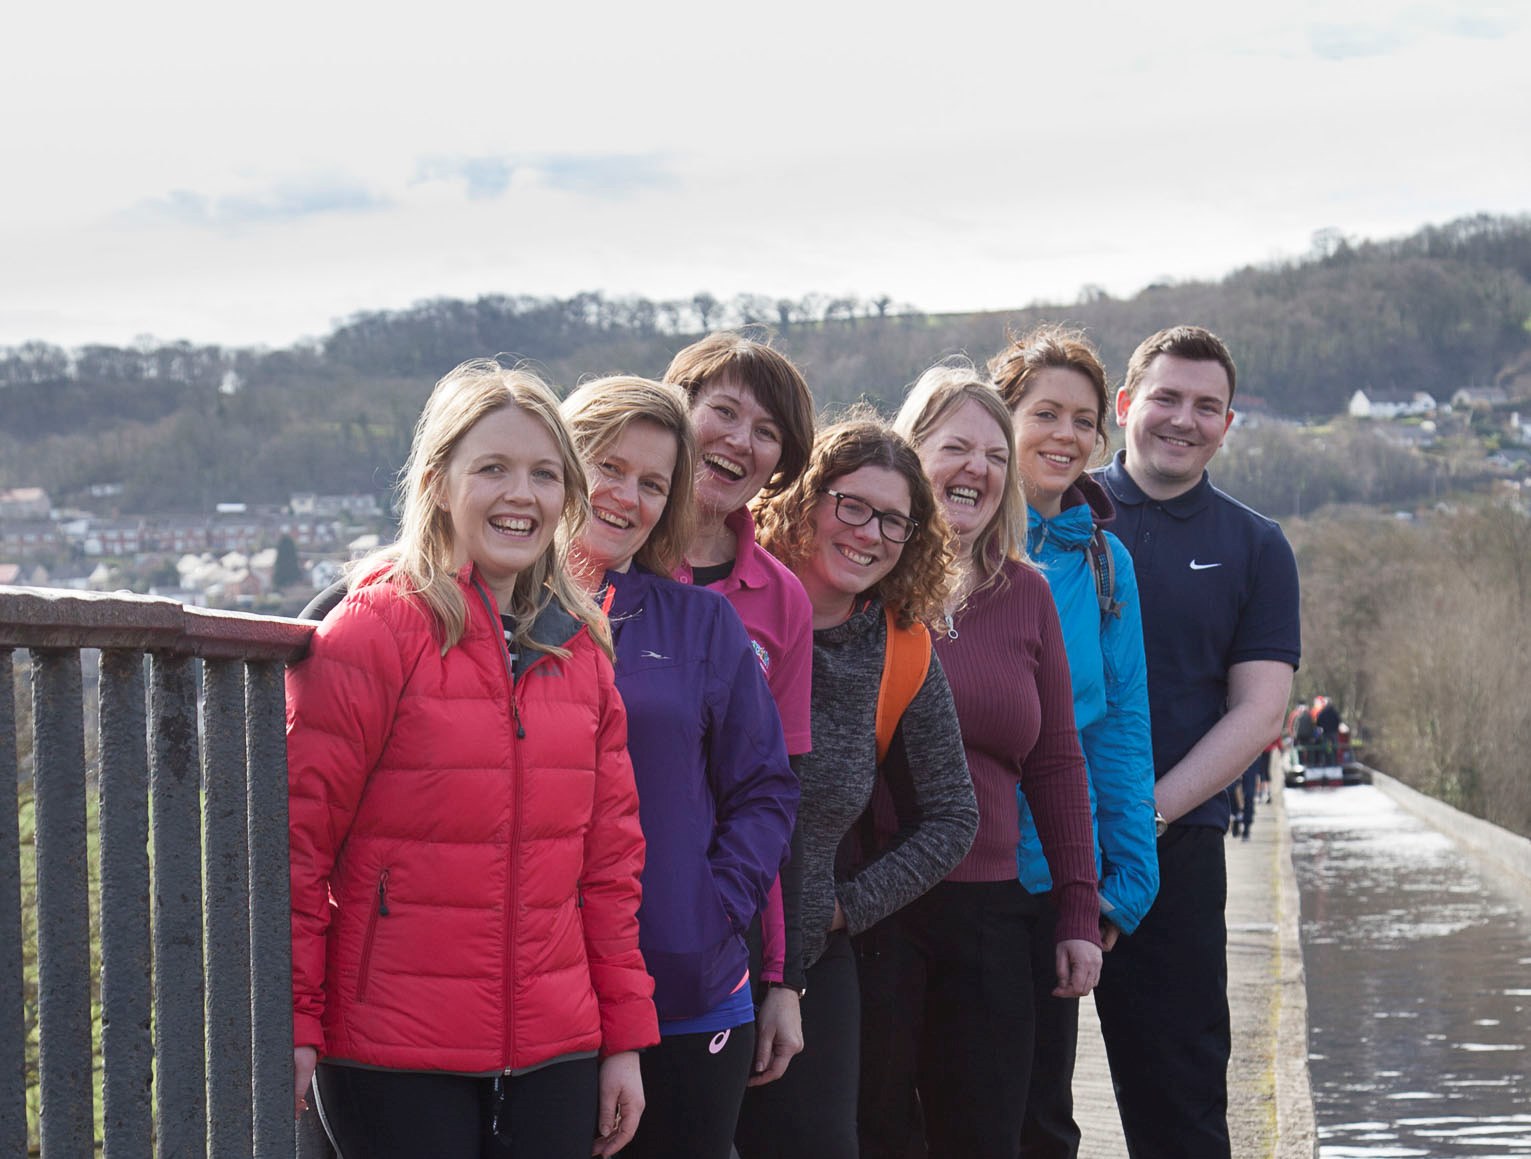 Legal eagles soar above the Dee Valley to raise cash for charity